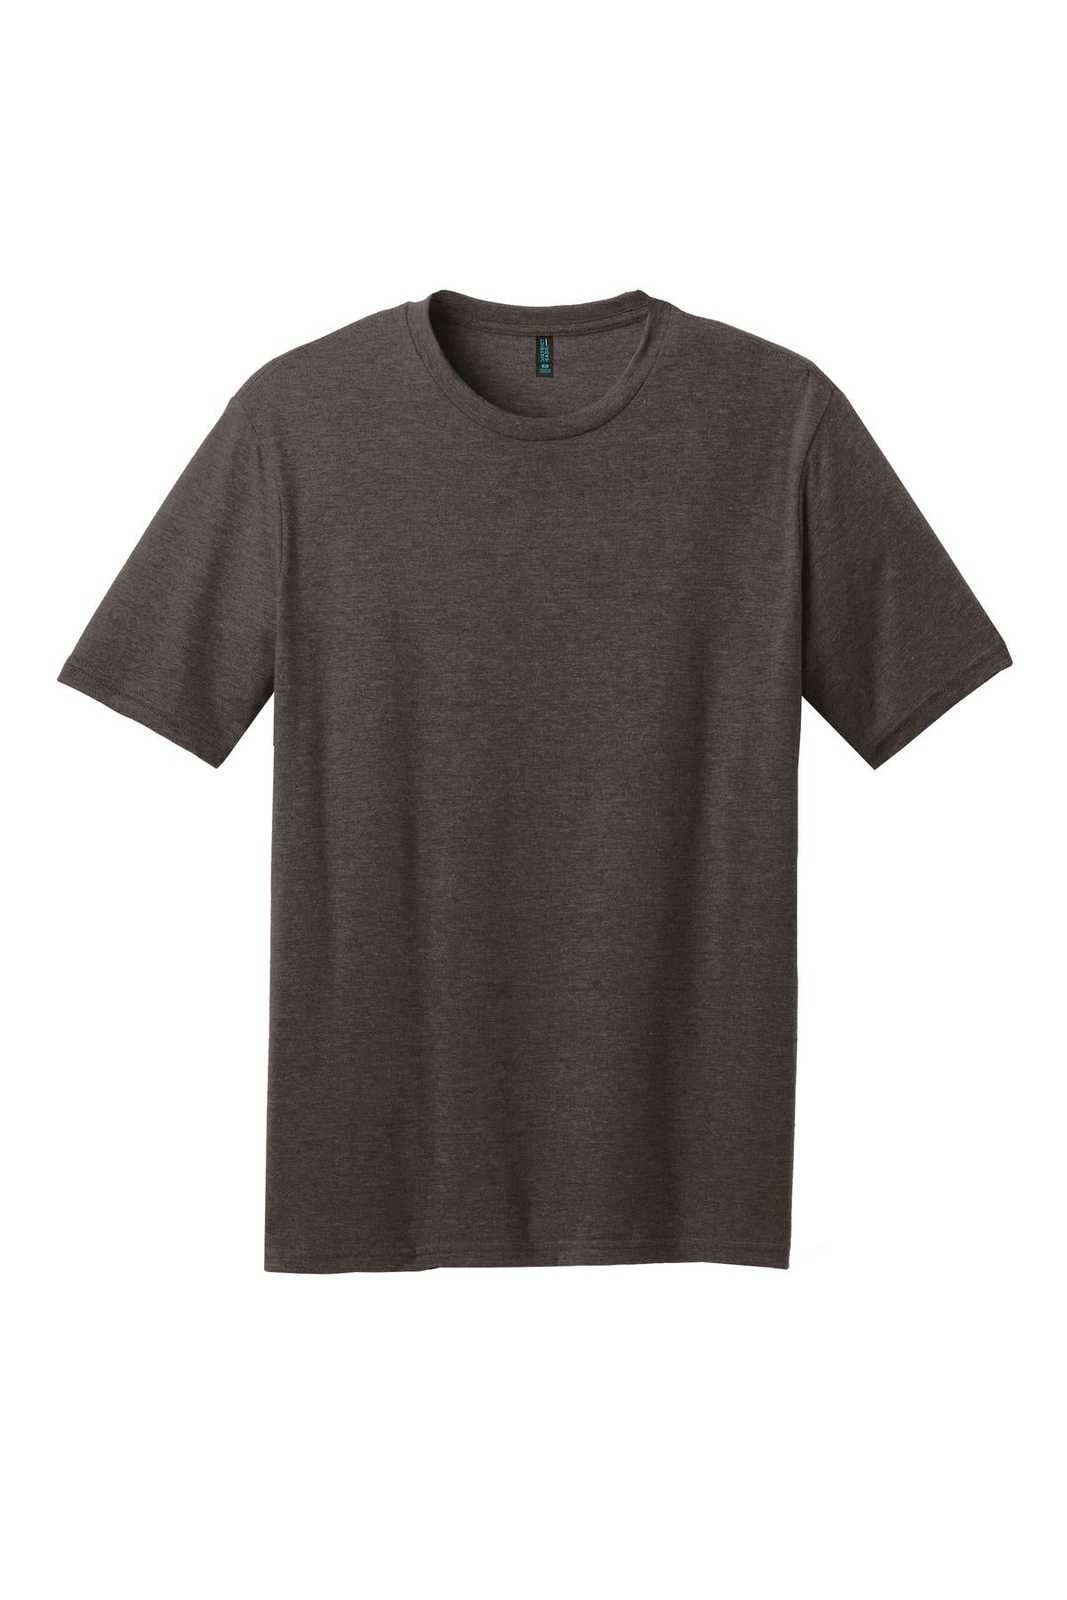 District DM108 Perfect Blend Tee - Heathered Brown - HIT a Double - 5